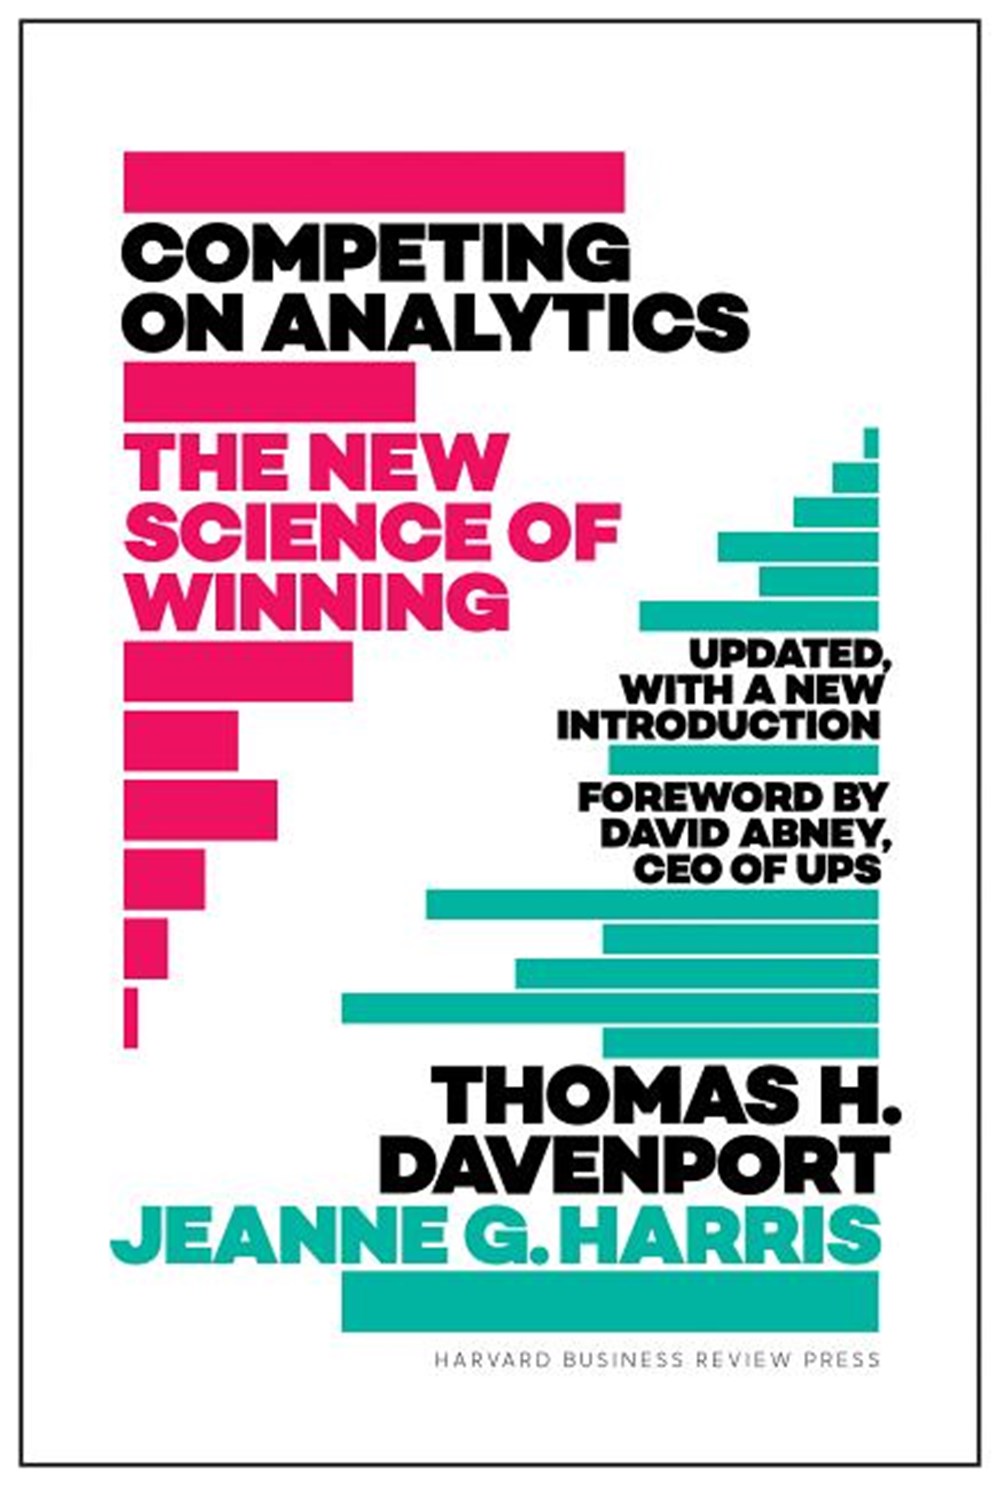 Competing on Analytics Updated, with a New Introduction: The New Science of Winning (Revised)